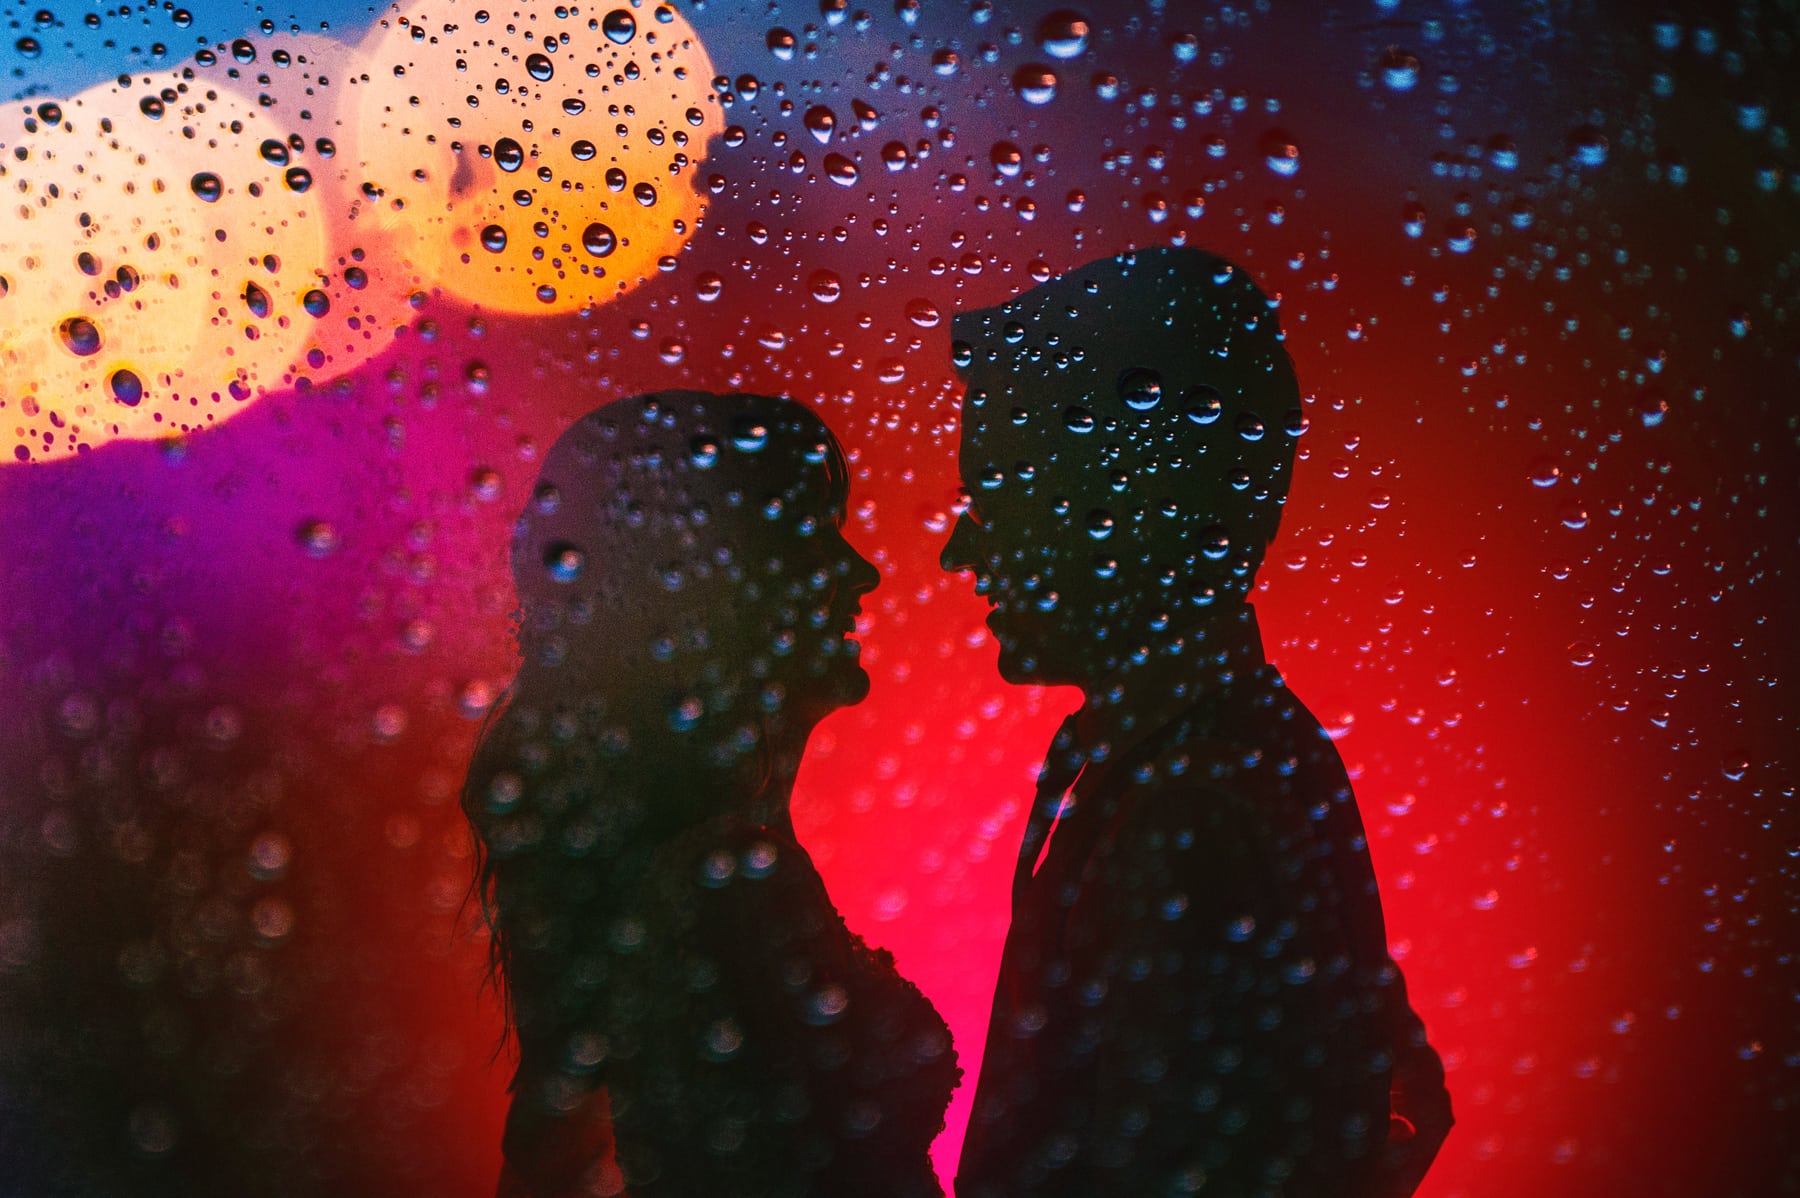 couple creative portrait silhouette with rain drops on glass and bright red 